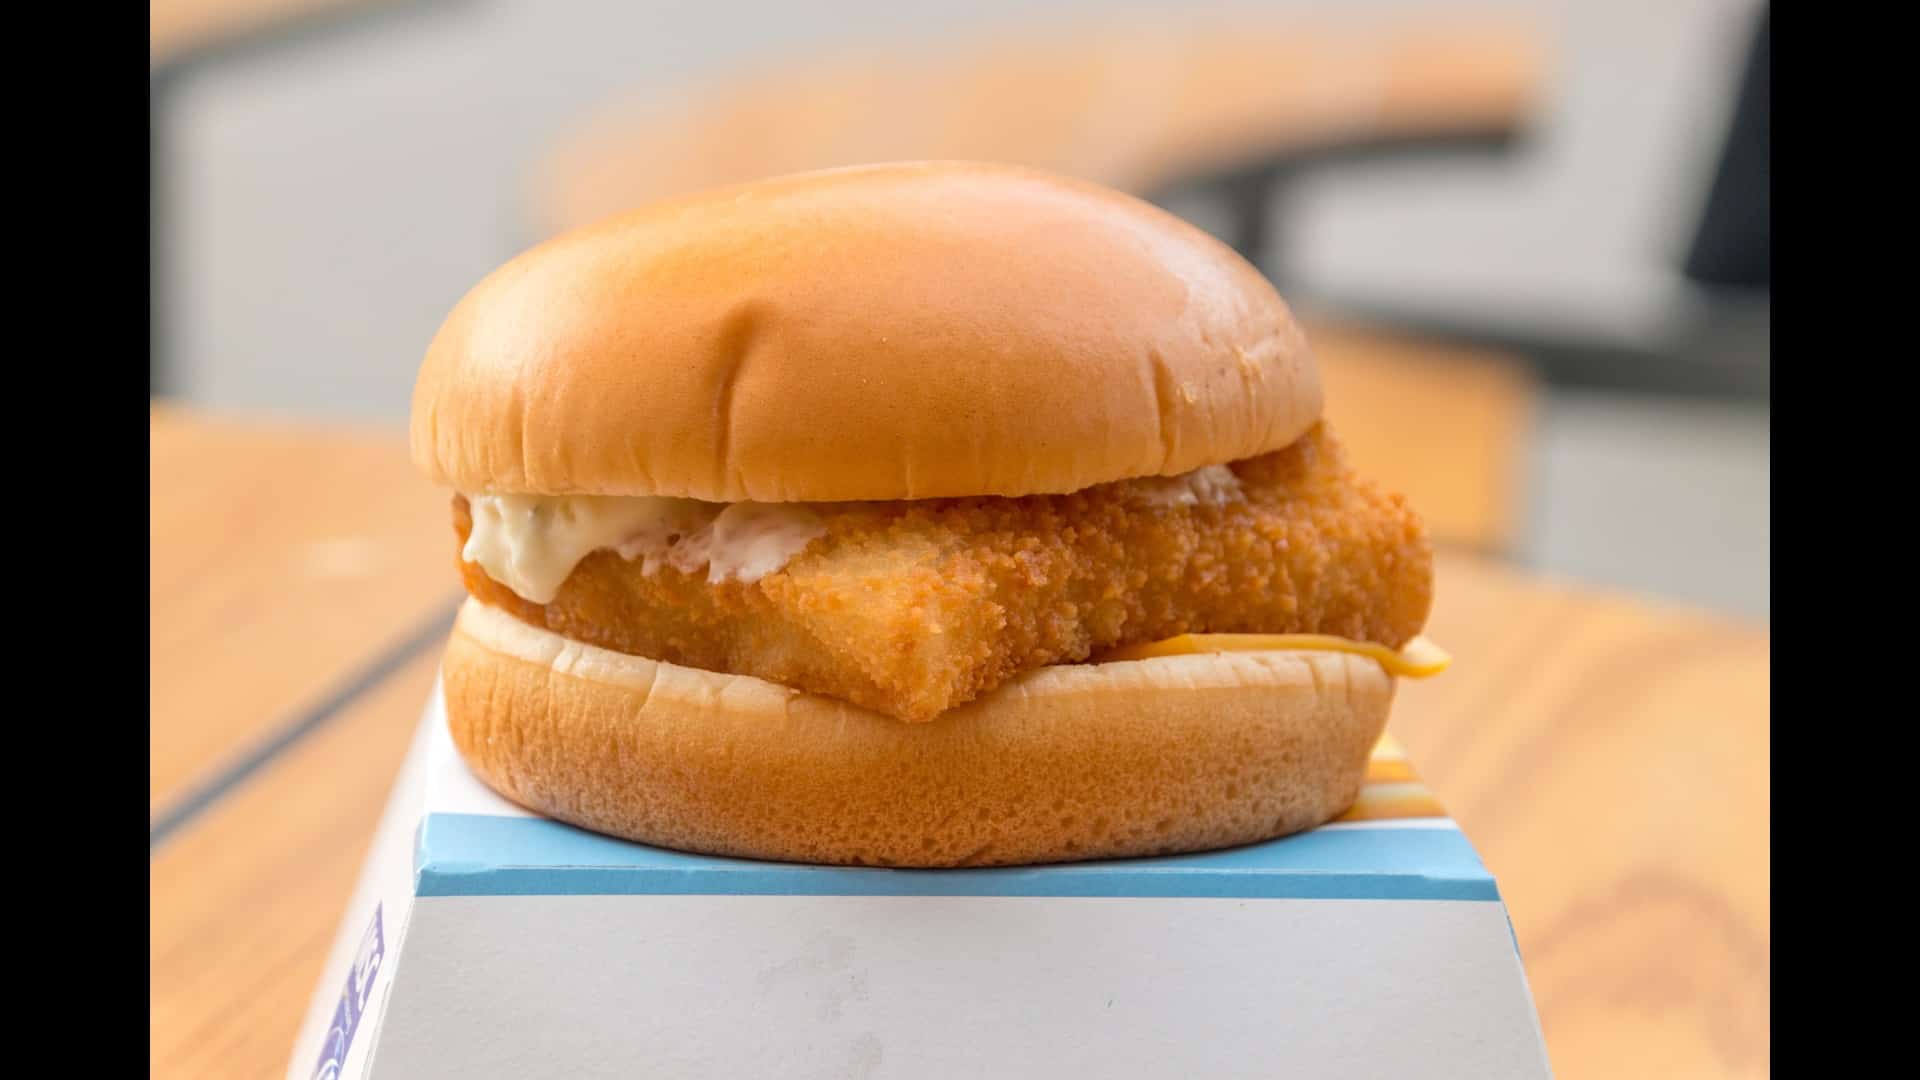 <p>McDonalds is very in tune with what their customers want and need. The company noticed that during Lent, sales greatly declined and discovered that it was because meat was not allowed during those 40 days. So, the company came up with a solution - the Filet-o-Fish! The fish sandwich was perfect for people following Lentan rules and gave them a great meal option. Plus, everyone else loved it, too! </p>